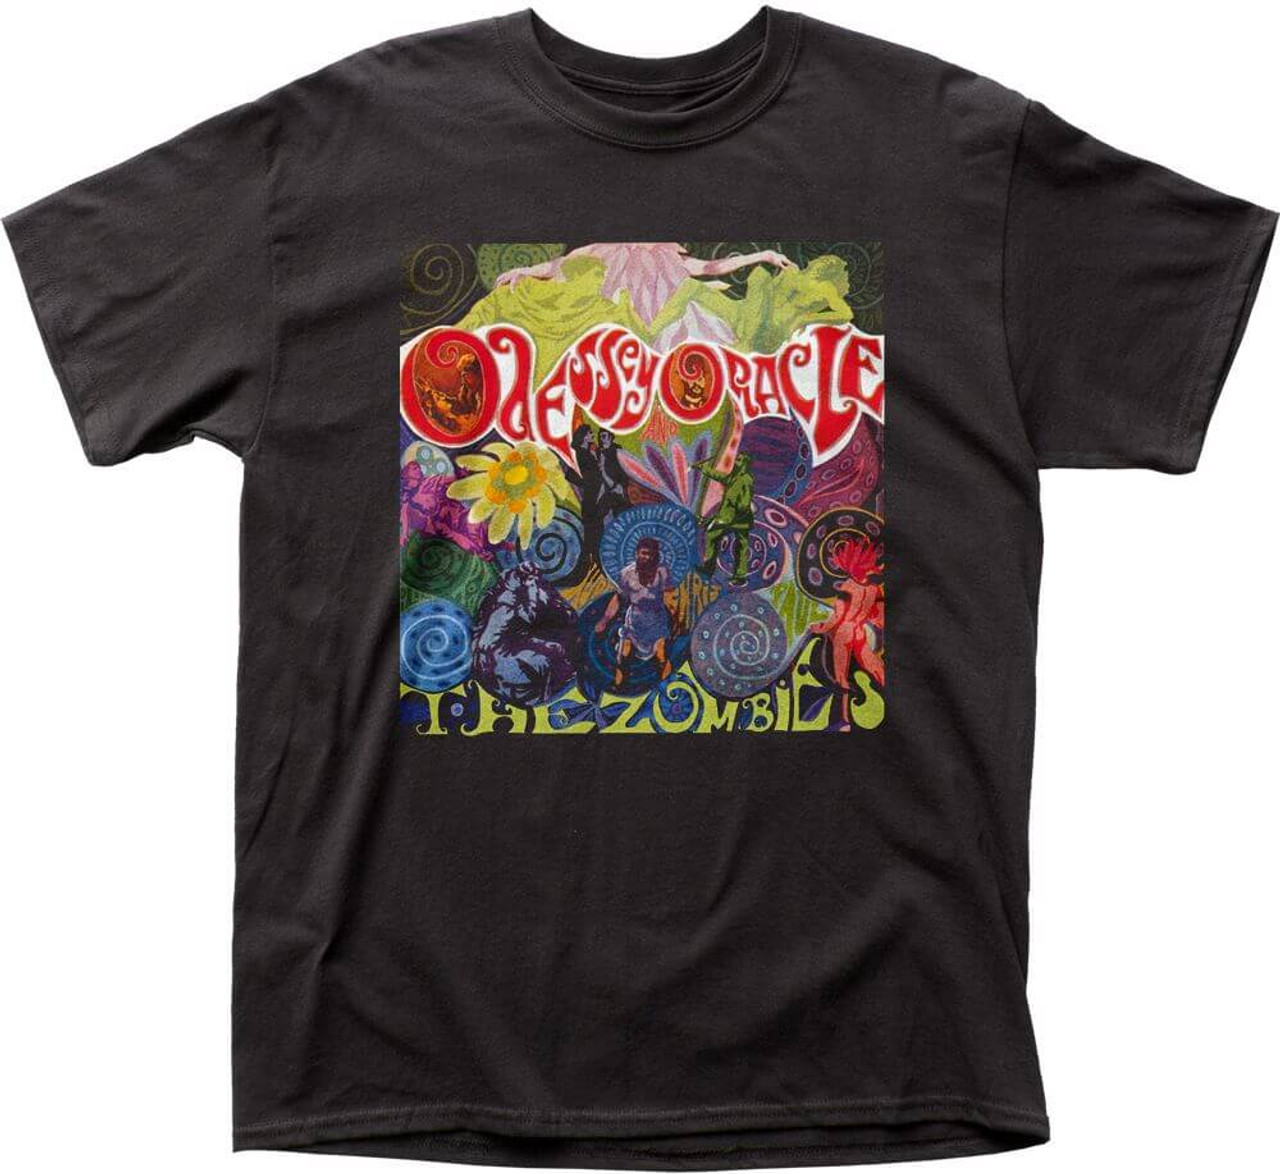 The Zombies Odyssey and Oracle T-shirt